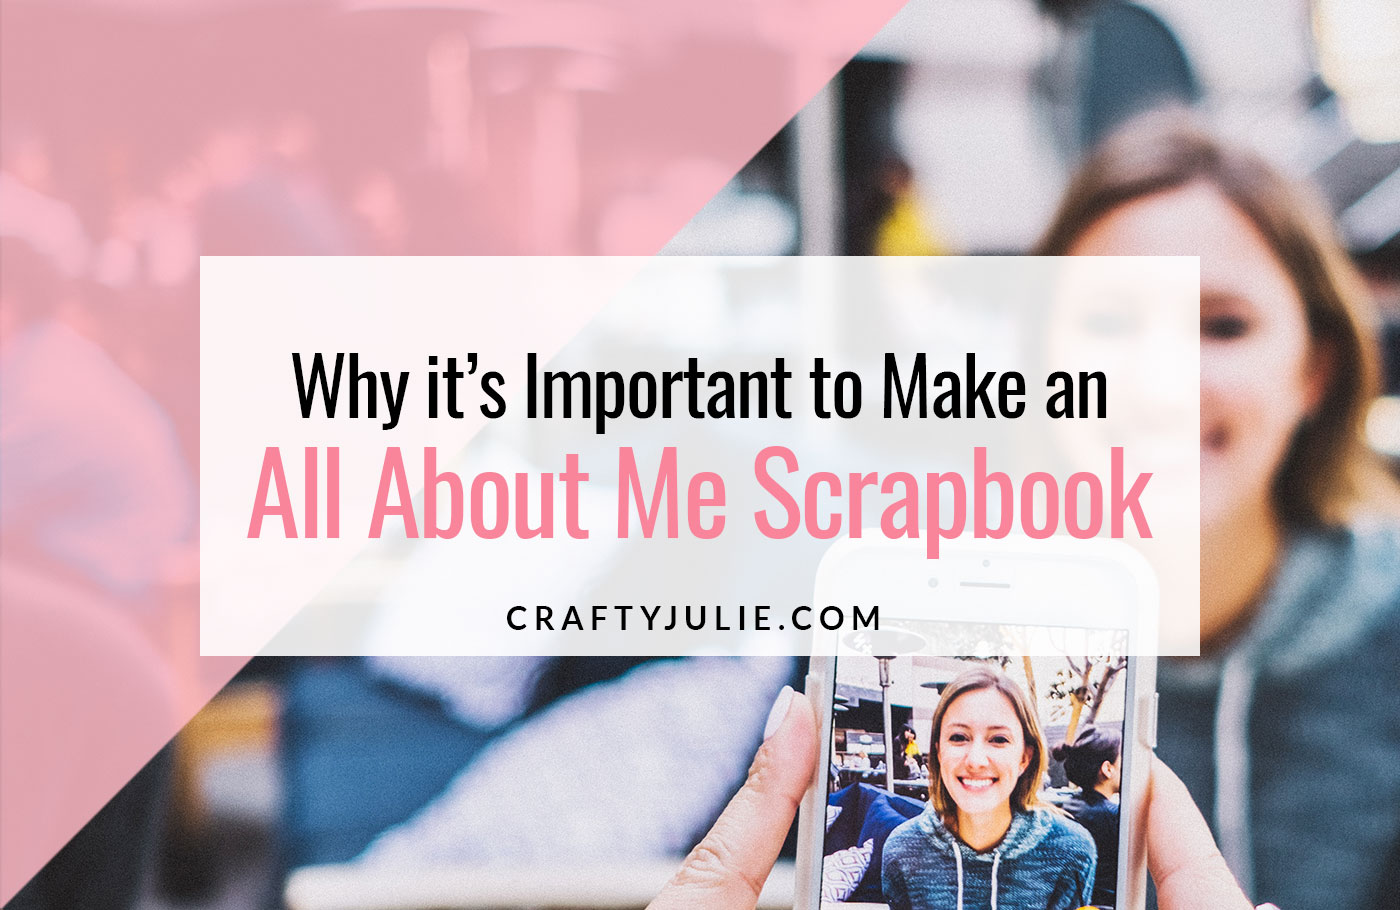 Crafty Julie | Why an All About Me Scrapbook is Important